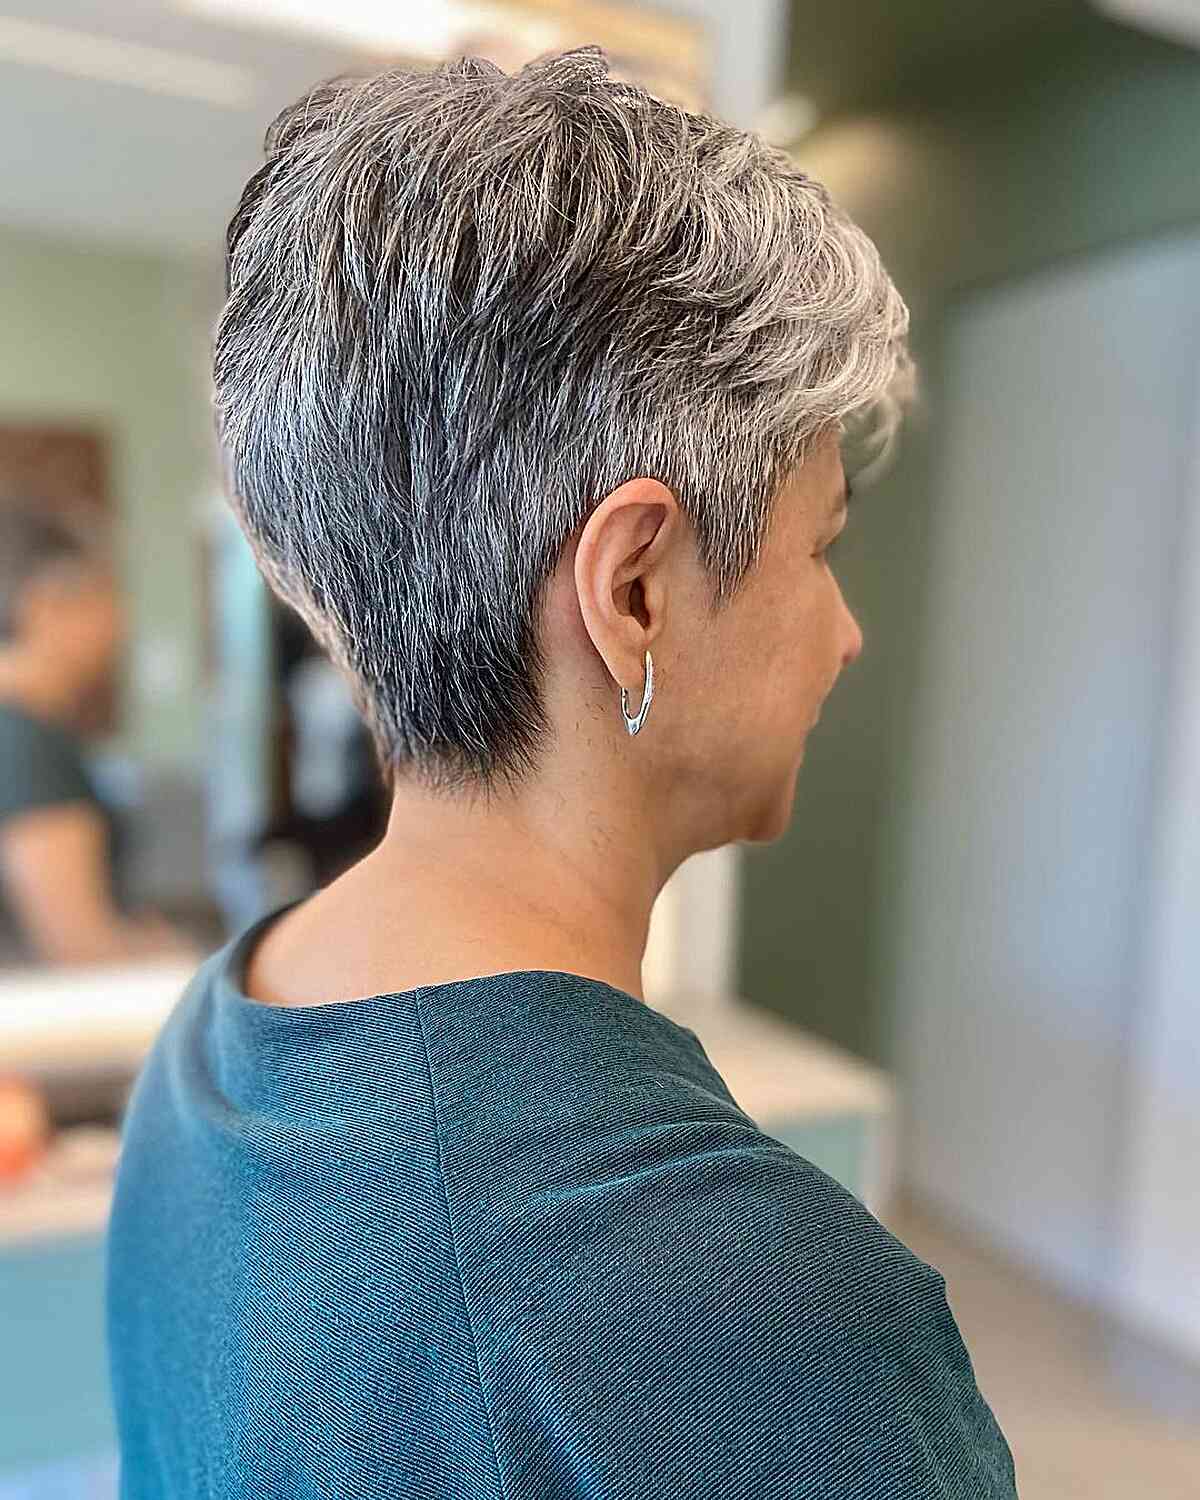 Low-Maintenance Salt-and-Pepper Tapered Pixie for Women Over 60 with Finer Locks